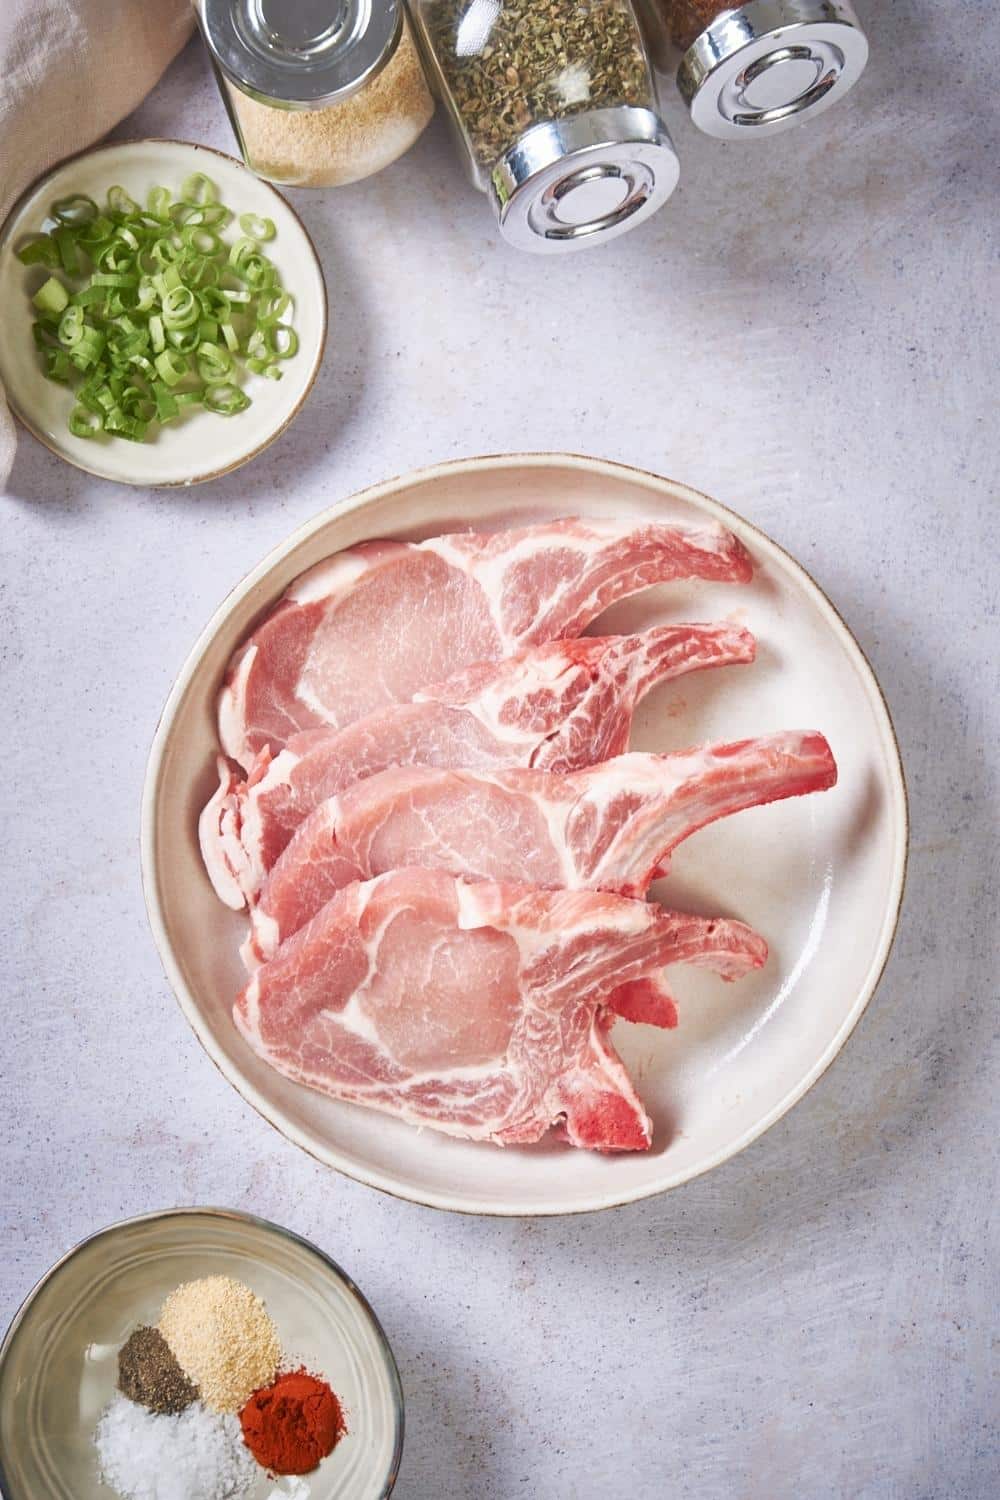 Four raw pork chops on a plate. A small plate of unmixed spices can be seen on the side, and on the other side there are three spice jars of garlic powder, paprika, and pepper, and a small plate of chopped green onions.